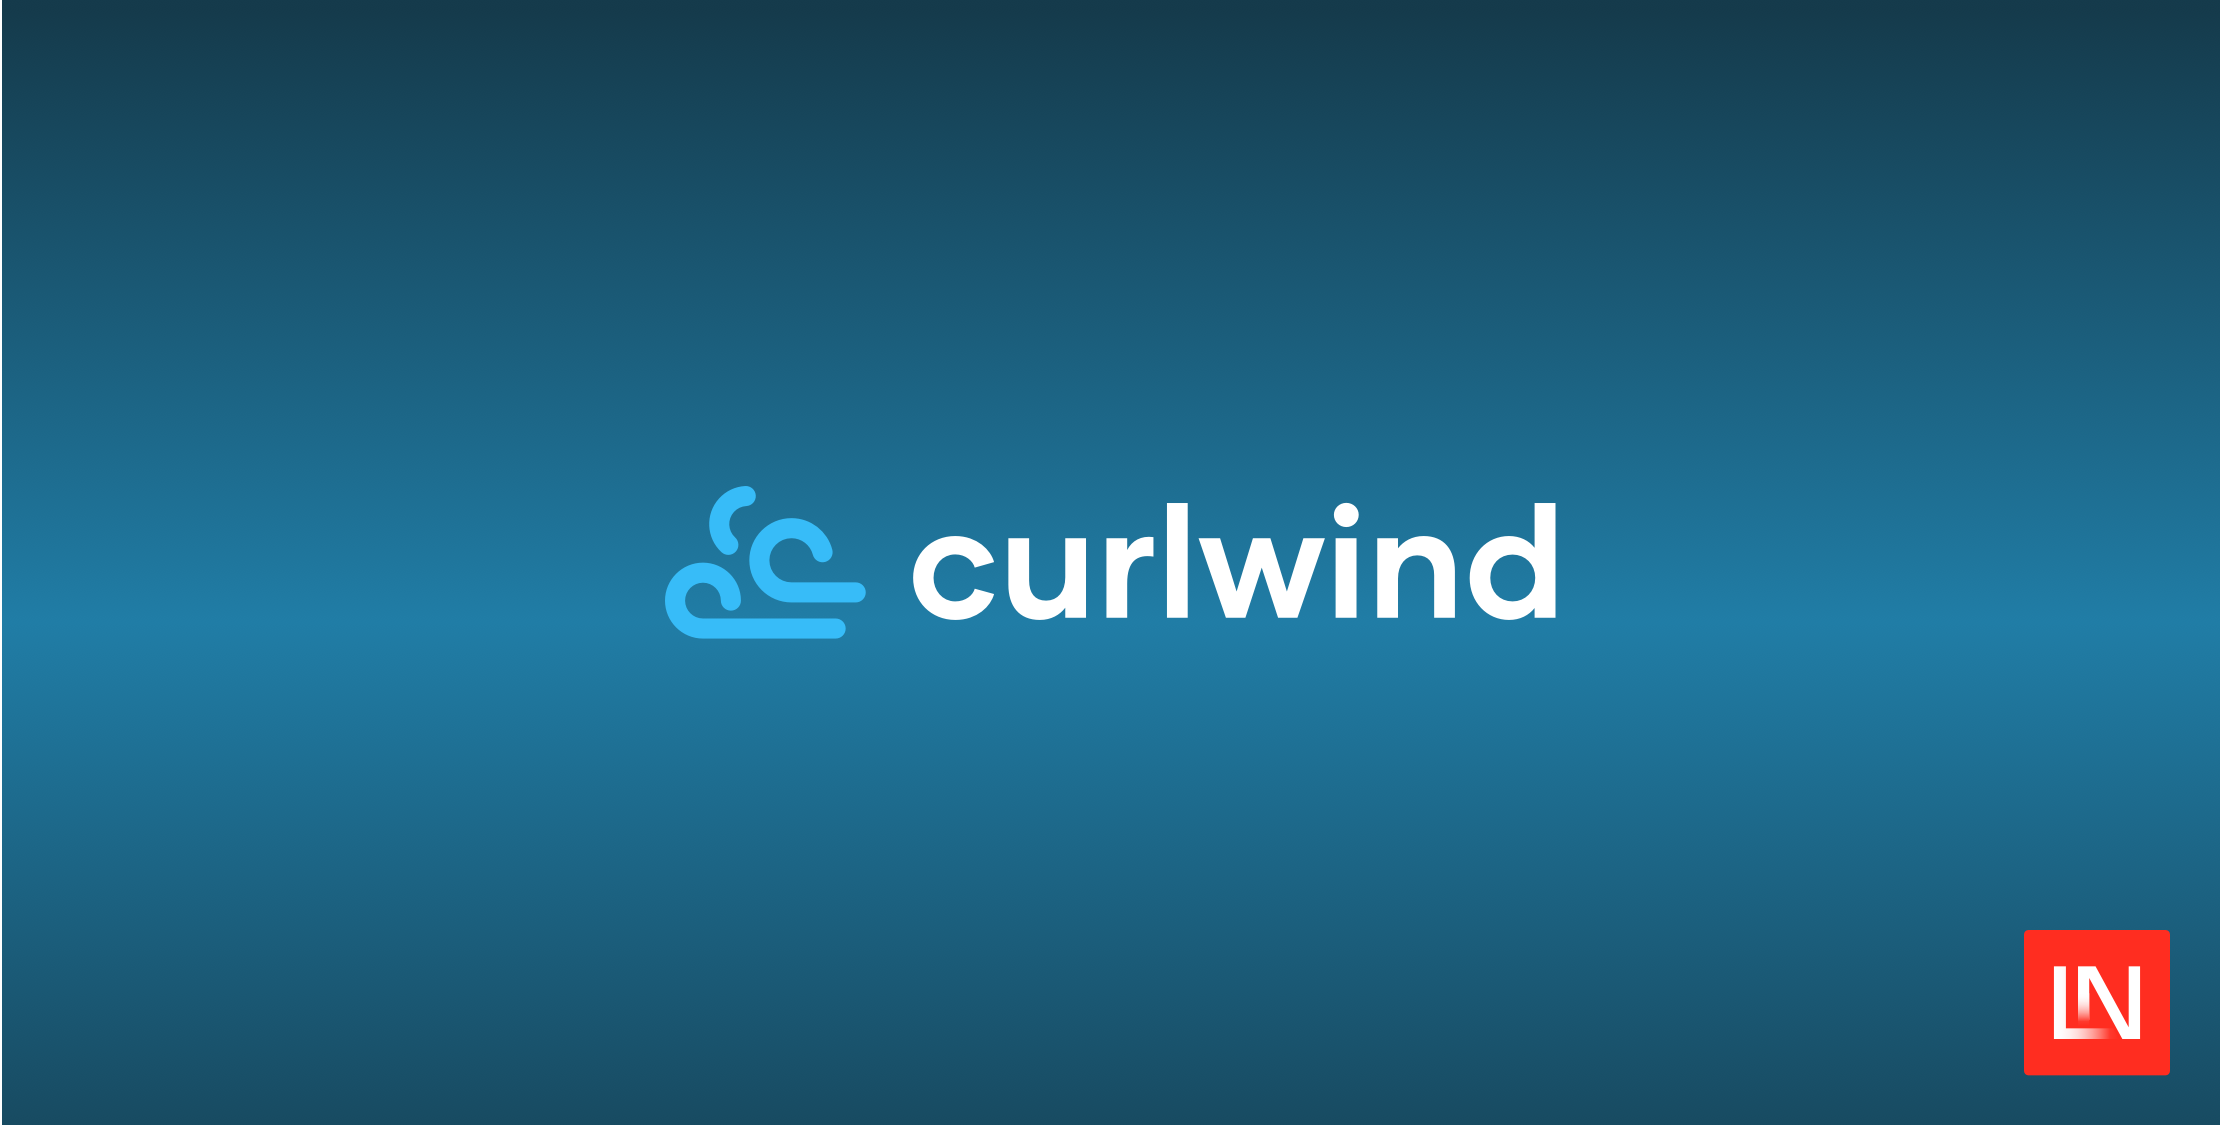 Generate Tailwind Utility Stylesheets on Demand with Curlwind image